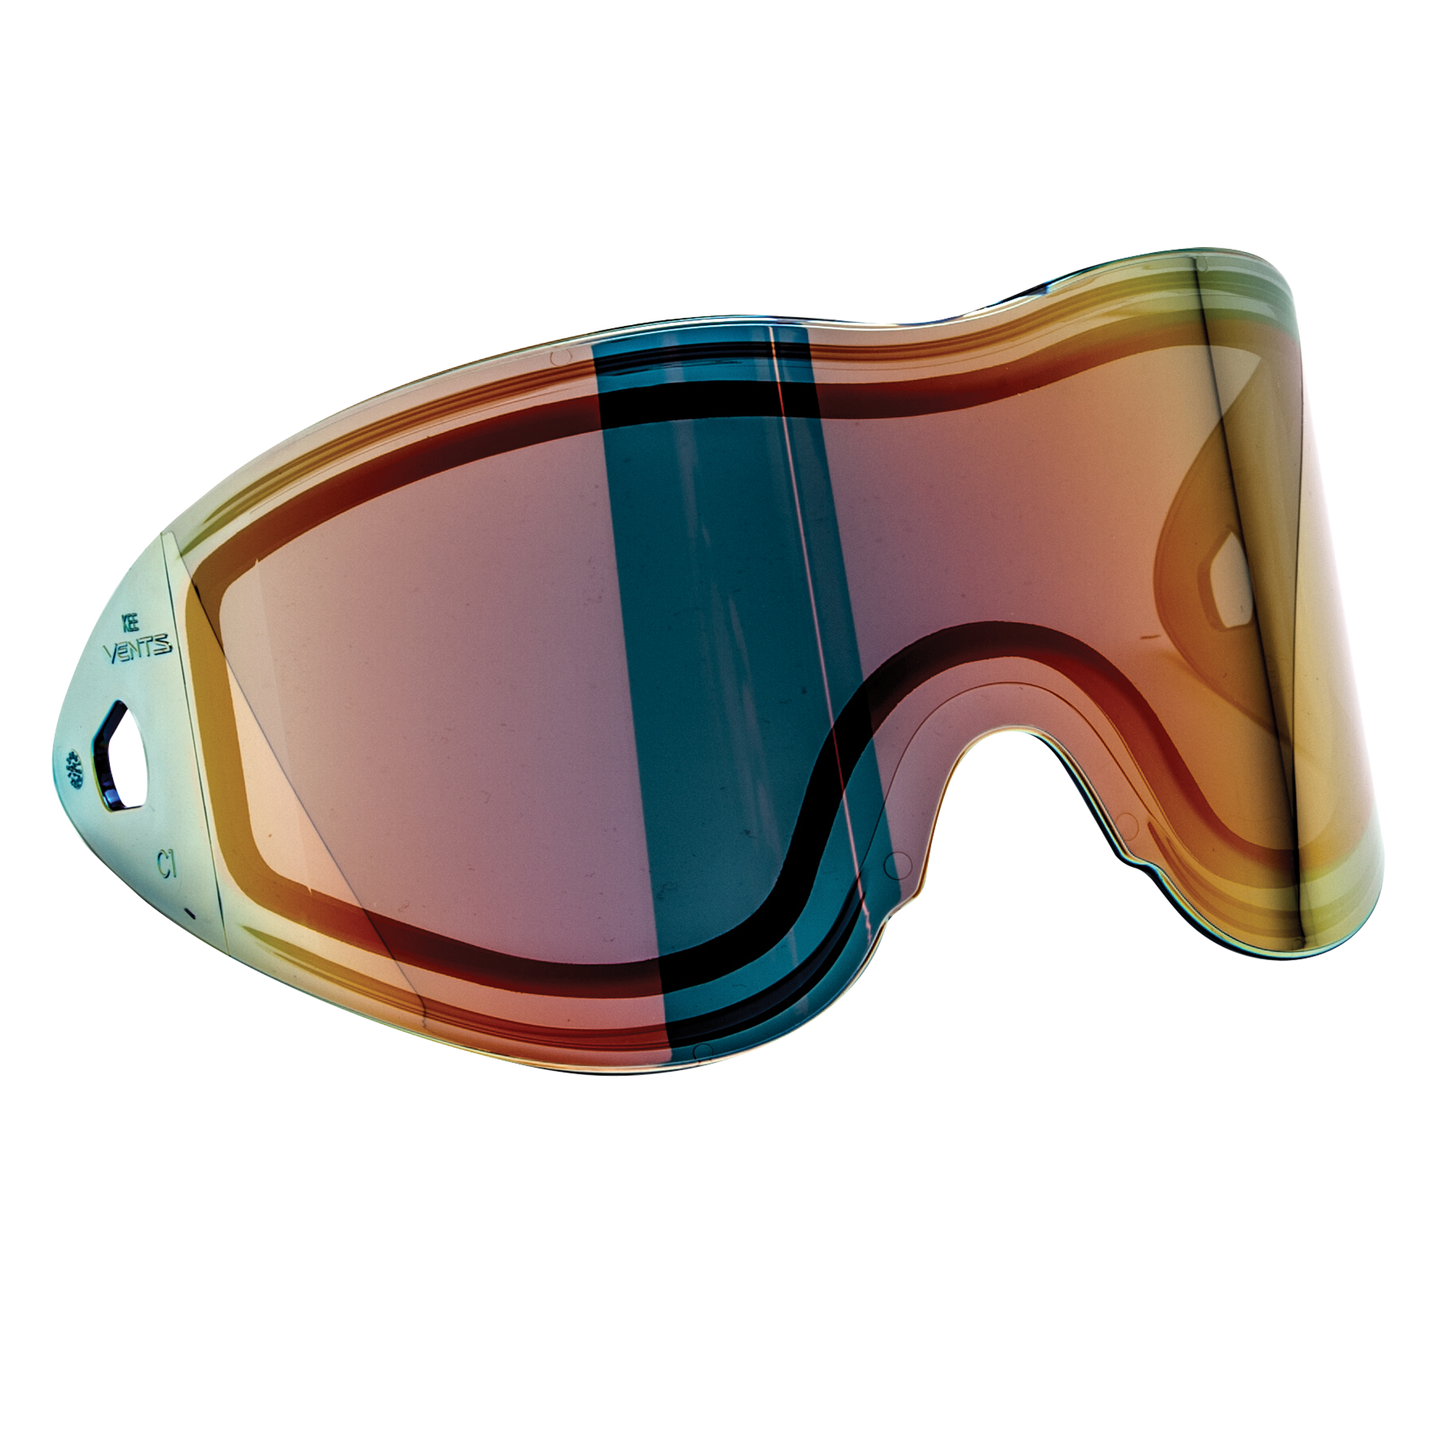 Empire Vents Thermal Goggle Lens - Fire Mirror